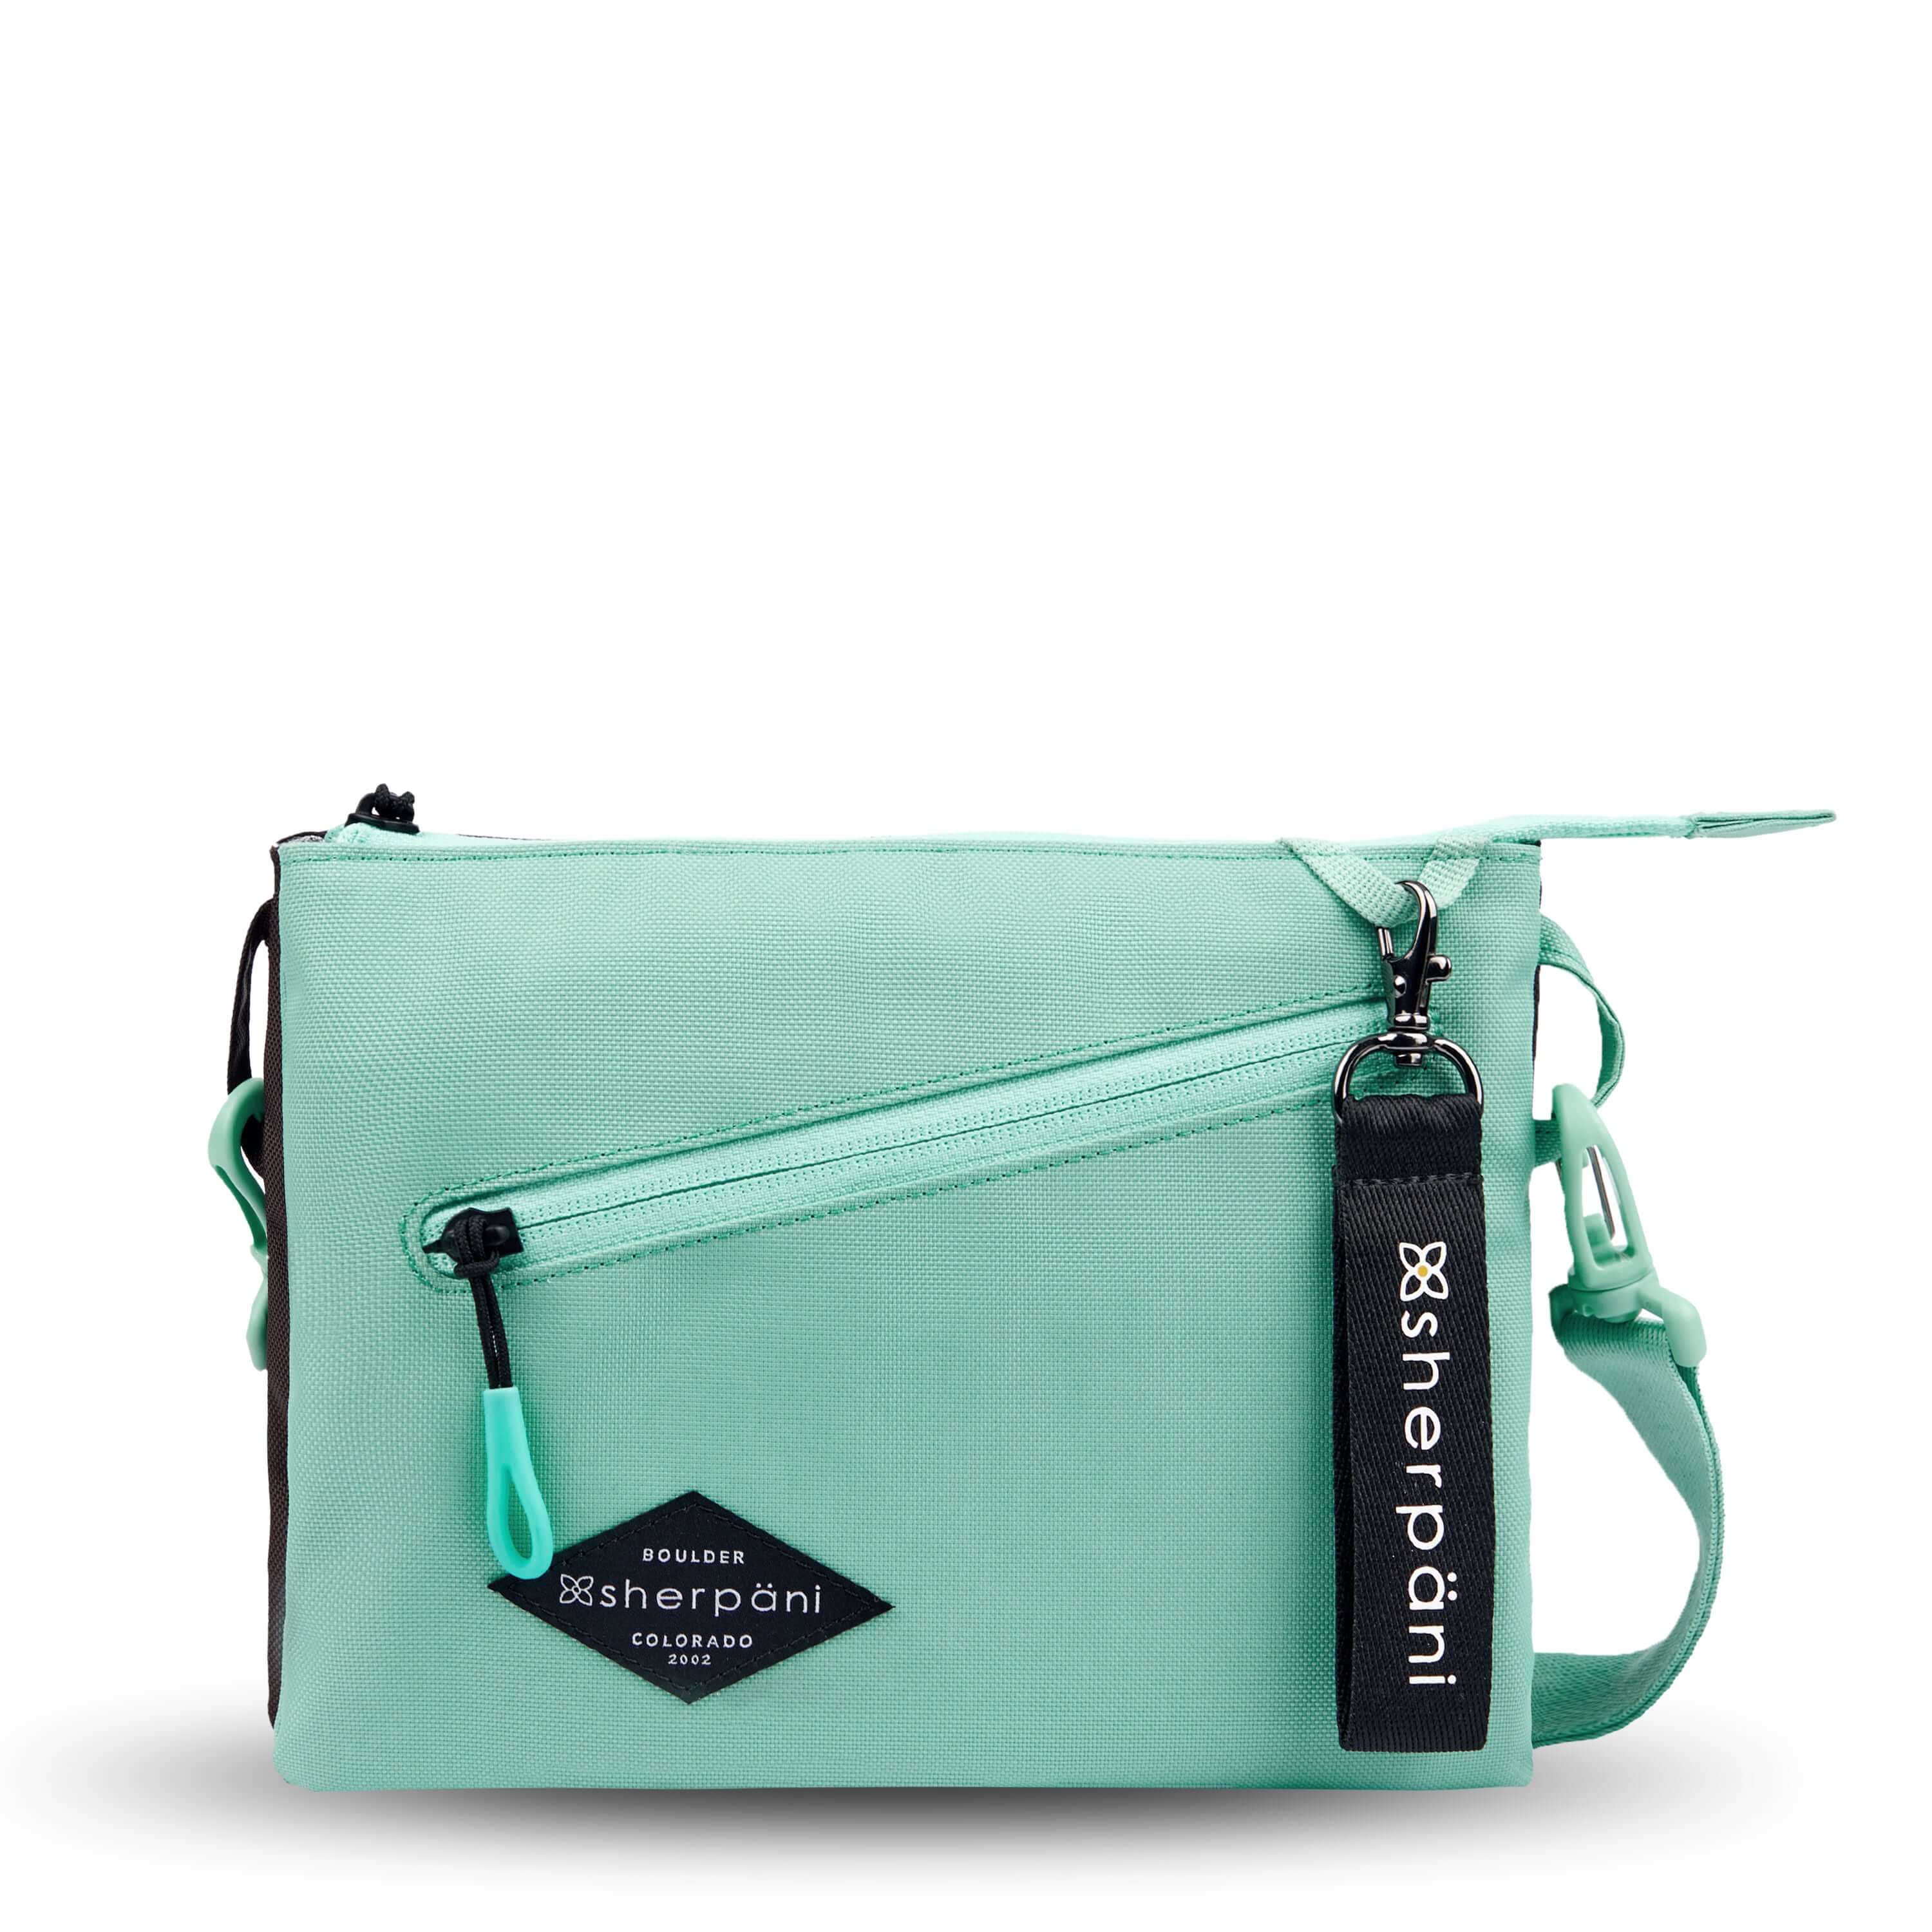 Flat front view of Sherpani crossbody, the Zoom in Seagreen. The bag is two-toned; the front half is light gray and the back half is brown. There is an external zipper pocket on the front with an easy-pull zipper accented in light green. The bag has an adjustable/detachable crossbody strap. There is a branded Sherpani keychain clipped to a fabric loop on the upper right corner. 